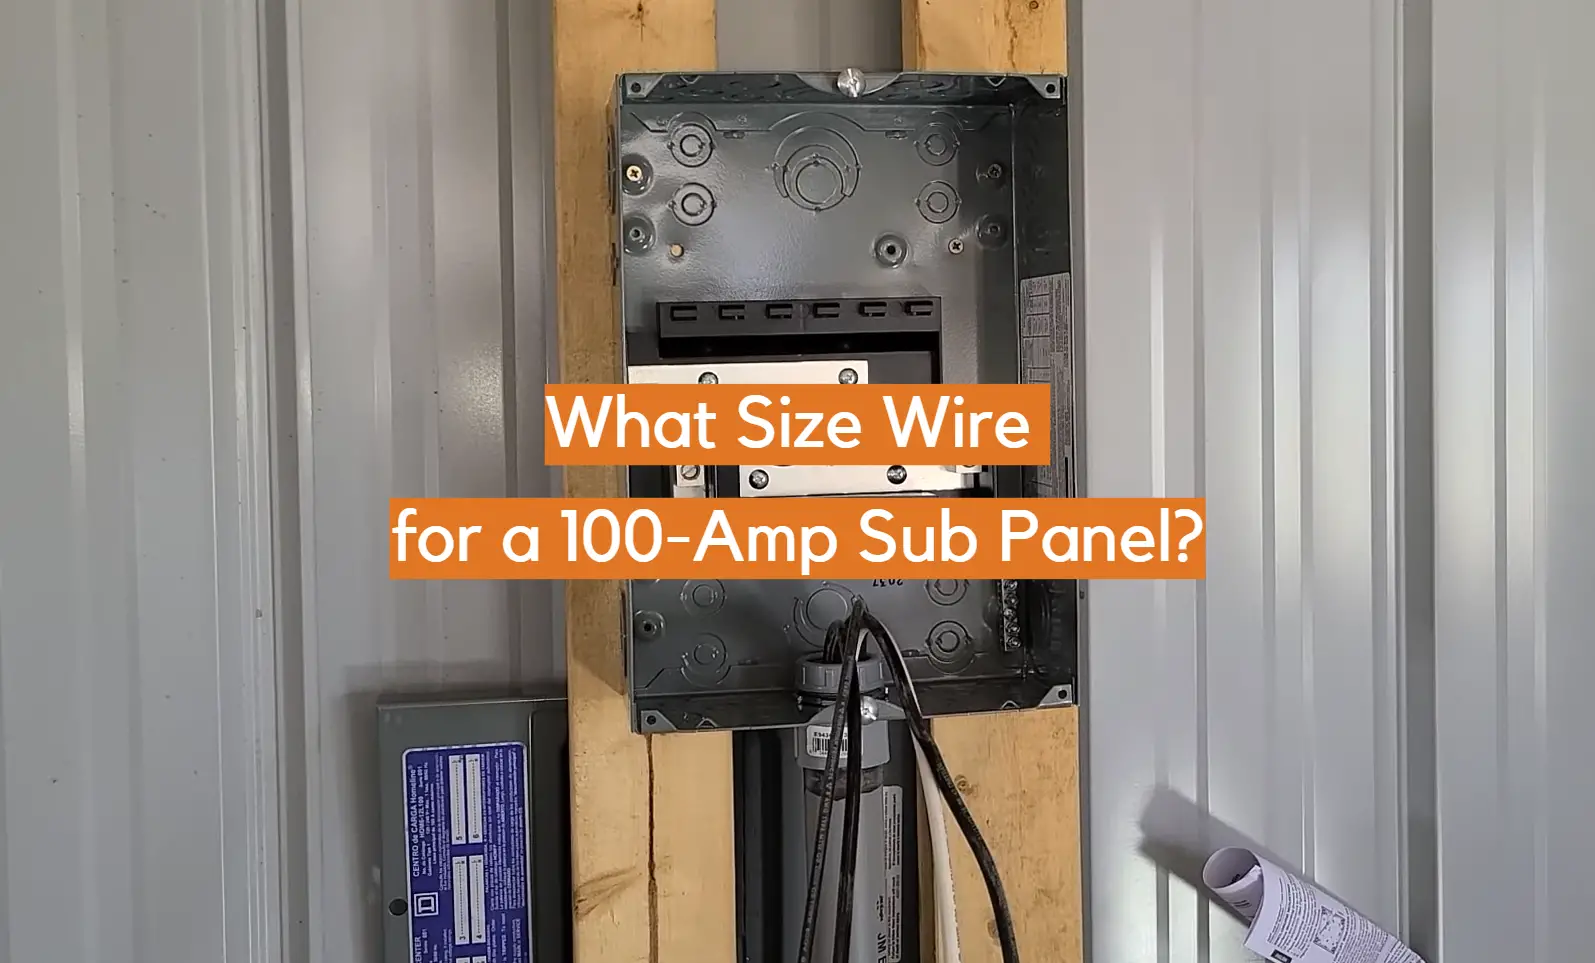 What Size Wire for a 100-Amp Sub Panel?